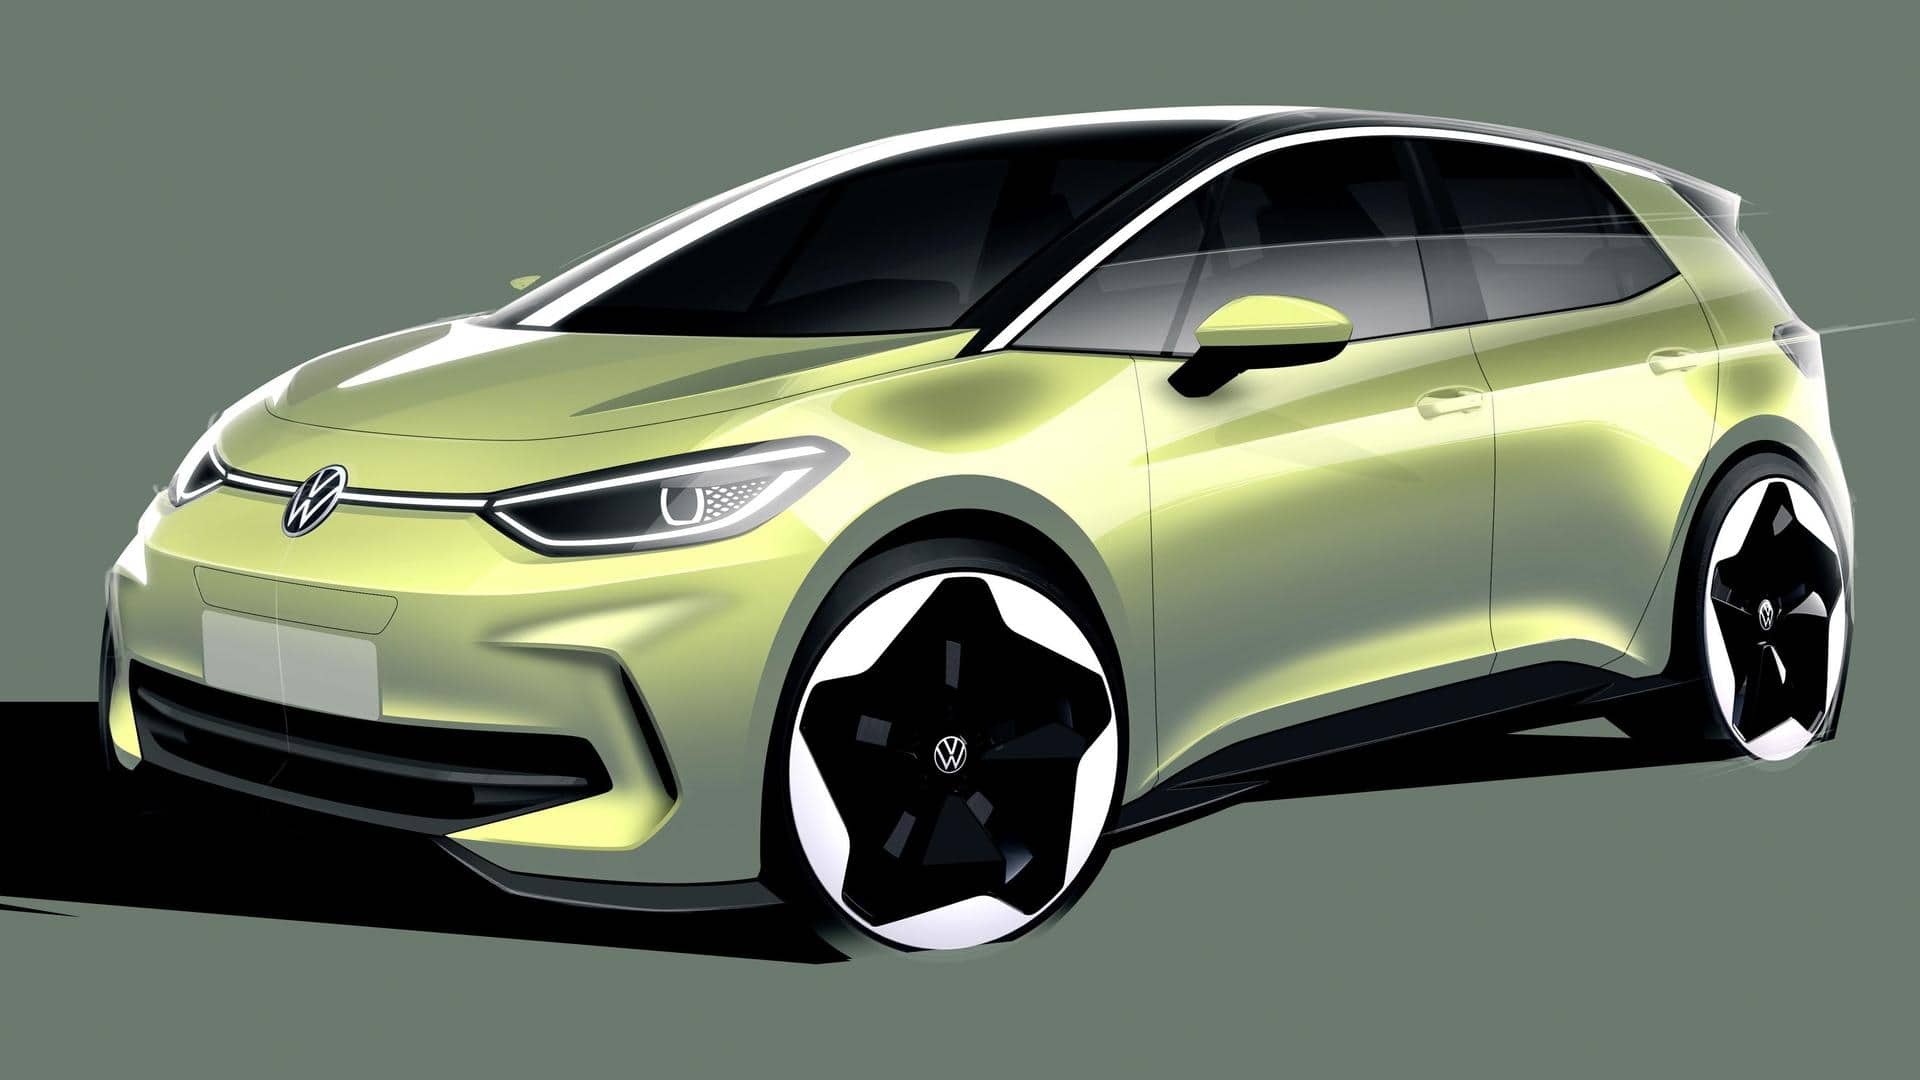 2023 Volkswagen ID.3 teased prior to revealing on March 1